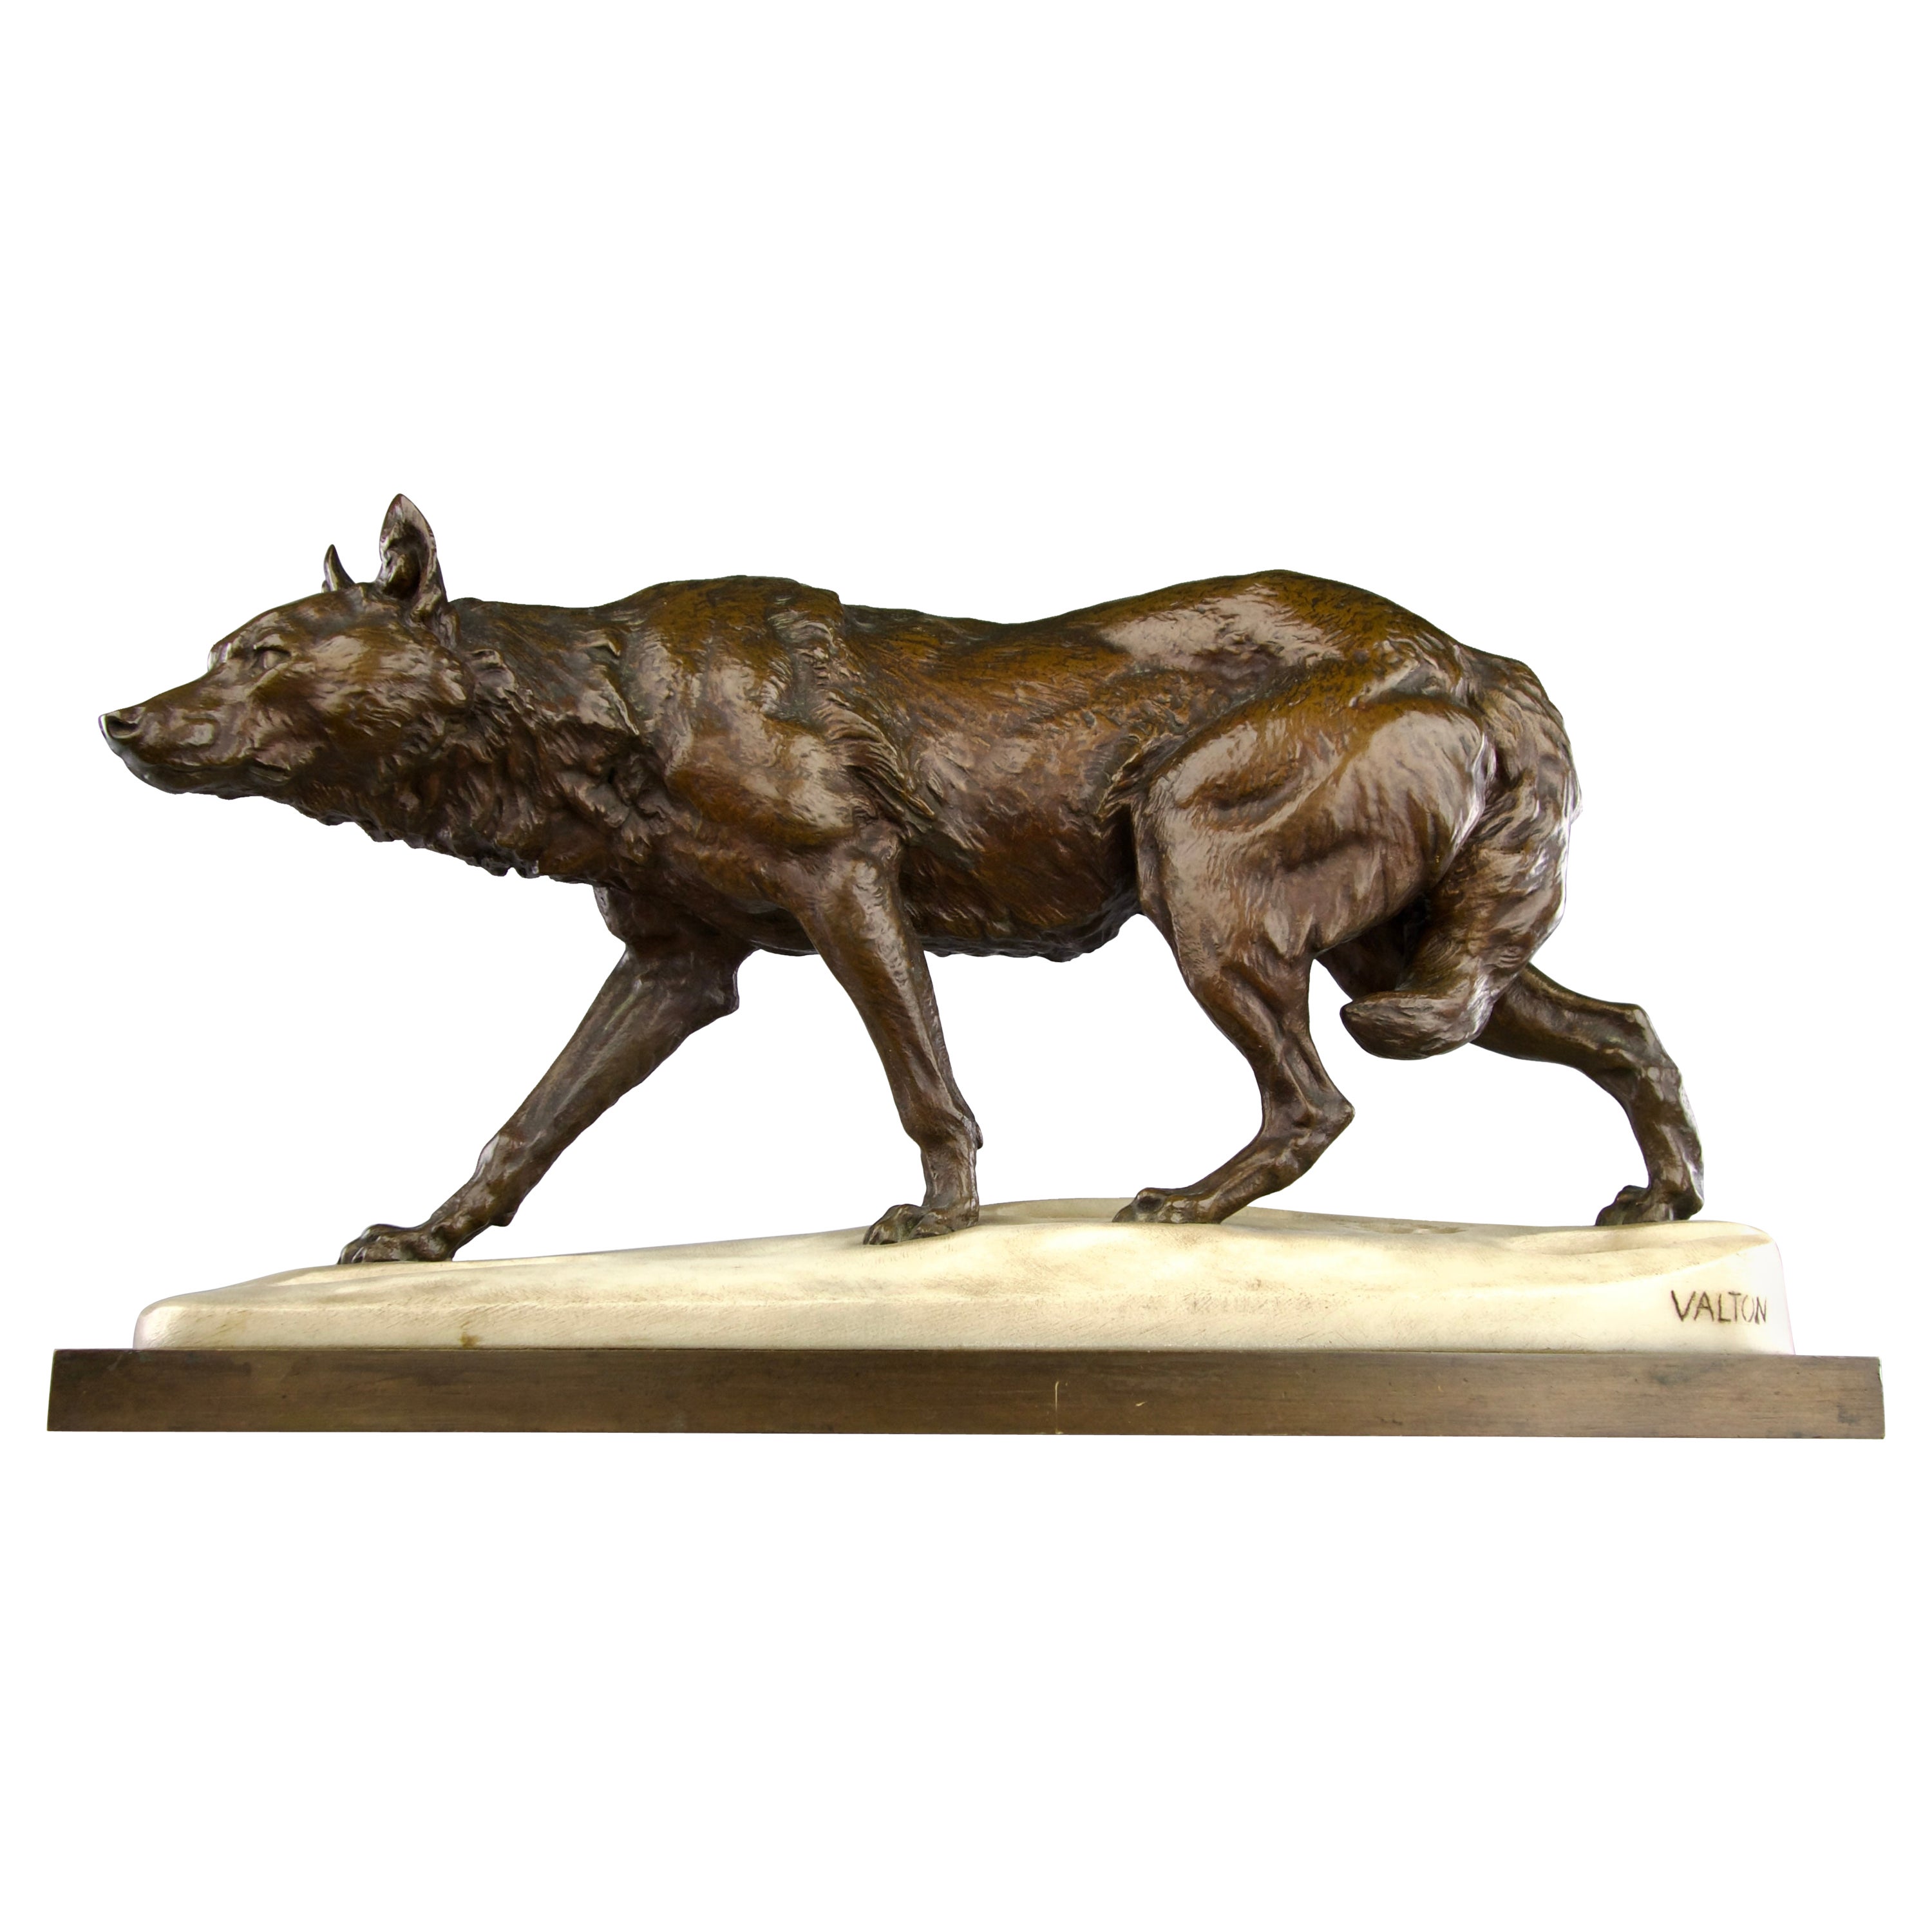 Charles Valton, The Tracking Wolf, Romantic Period Sculpture 19th Century France For Sale